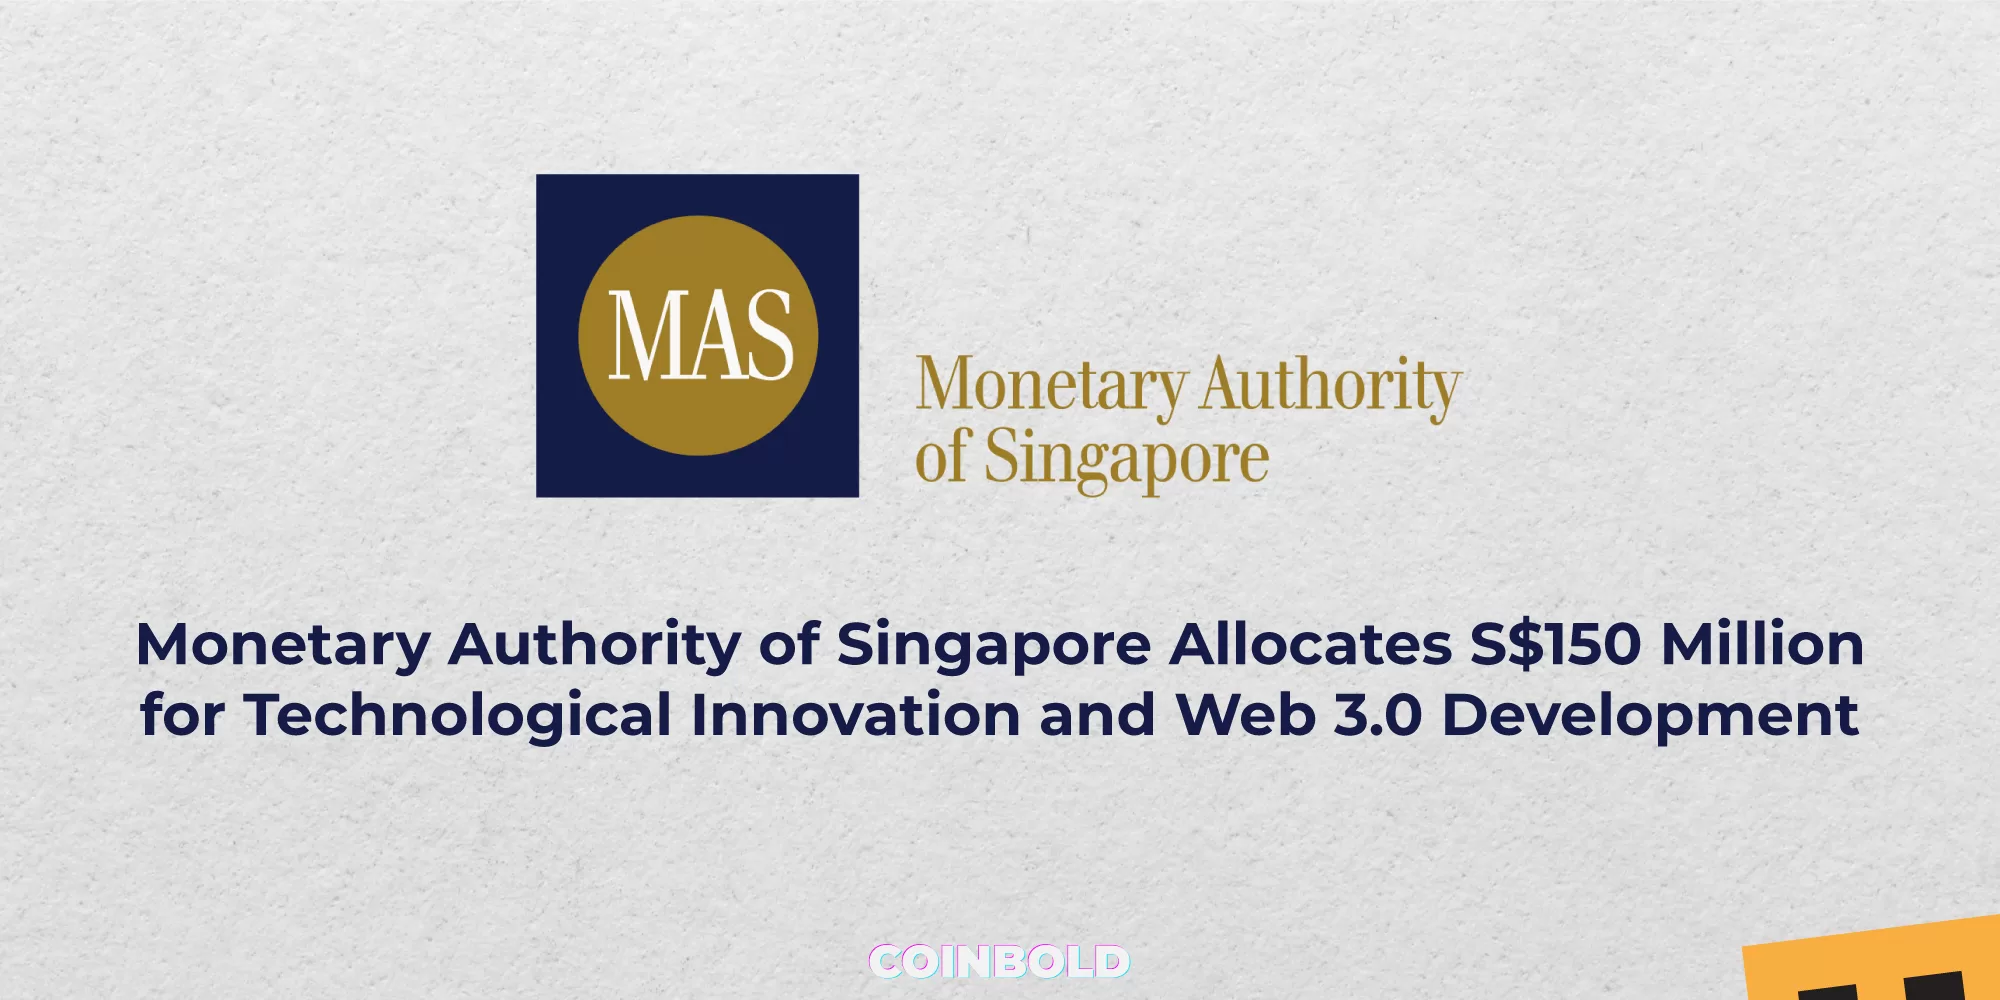 Monetary Authority of Singapore Allocates S$150 Million for Technological Innovation and Web 3.0 Development